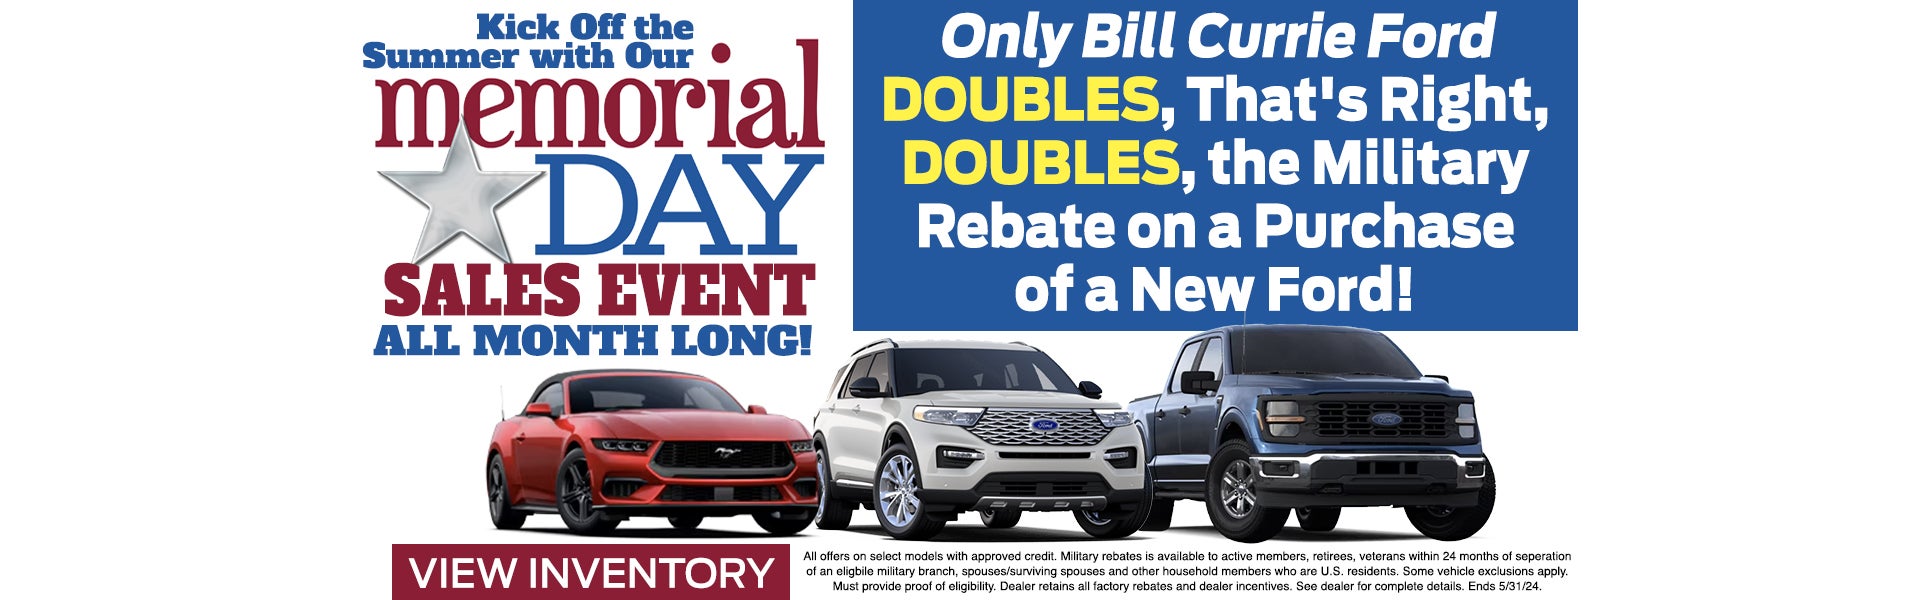 DOUBLES on the Military Rebate